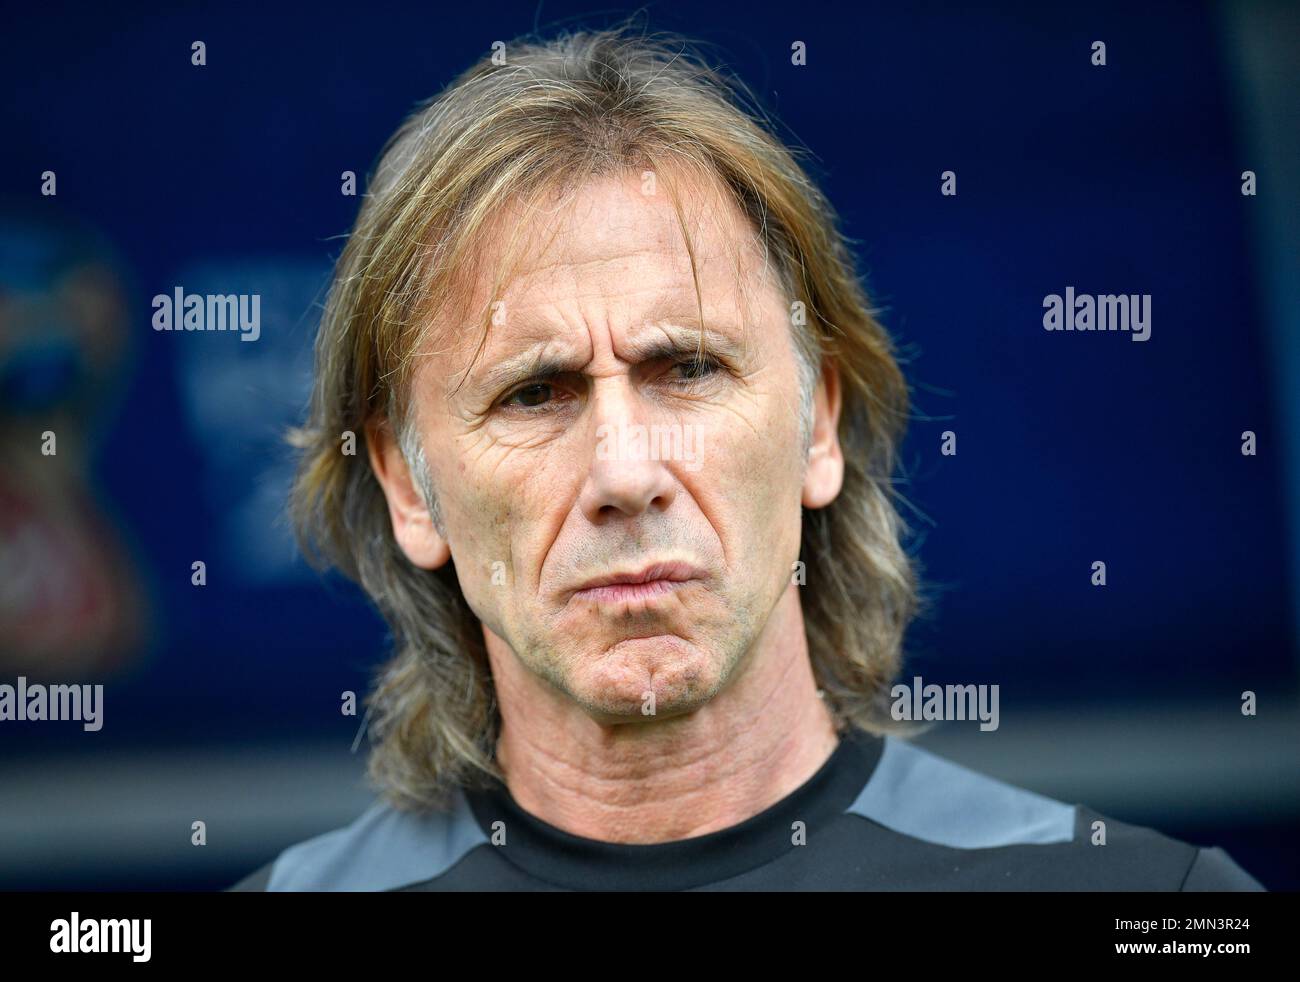 Peru head coach Ricardo Gareca waits for the beginning of the group C match  between Australia and Peru, at the 2018 soccer World Cup in the Fisht  Stadium in Sochi, Russia, Tuesday,